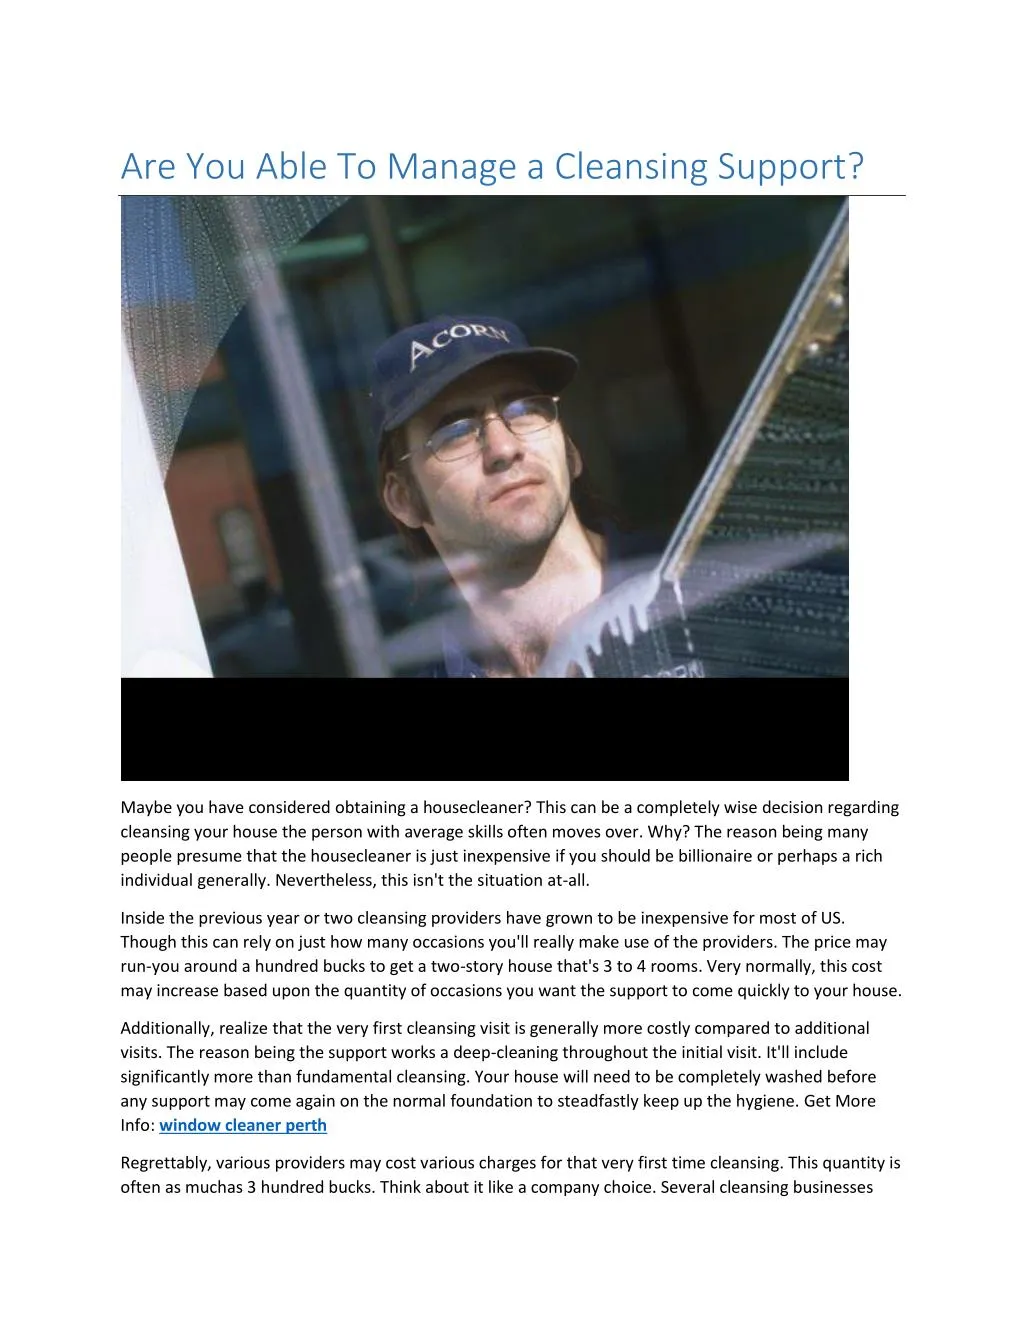 are you able to manage a cleansing support